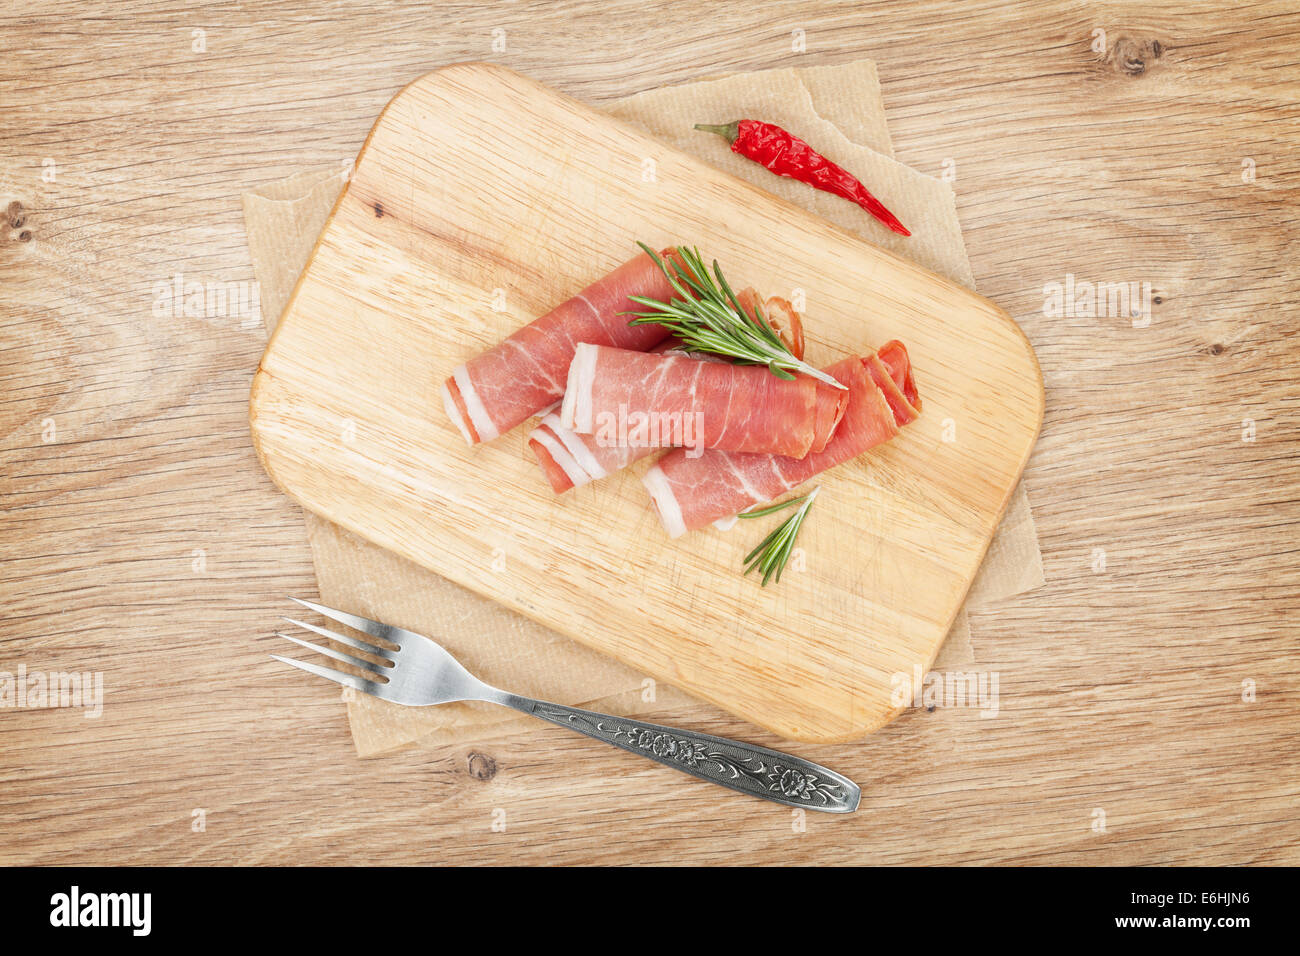 Prosciutto with spices. Over wooden table background Stock Photo